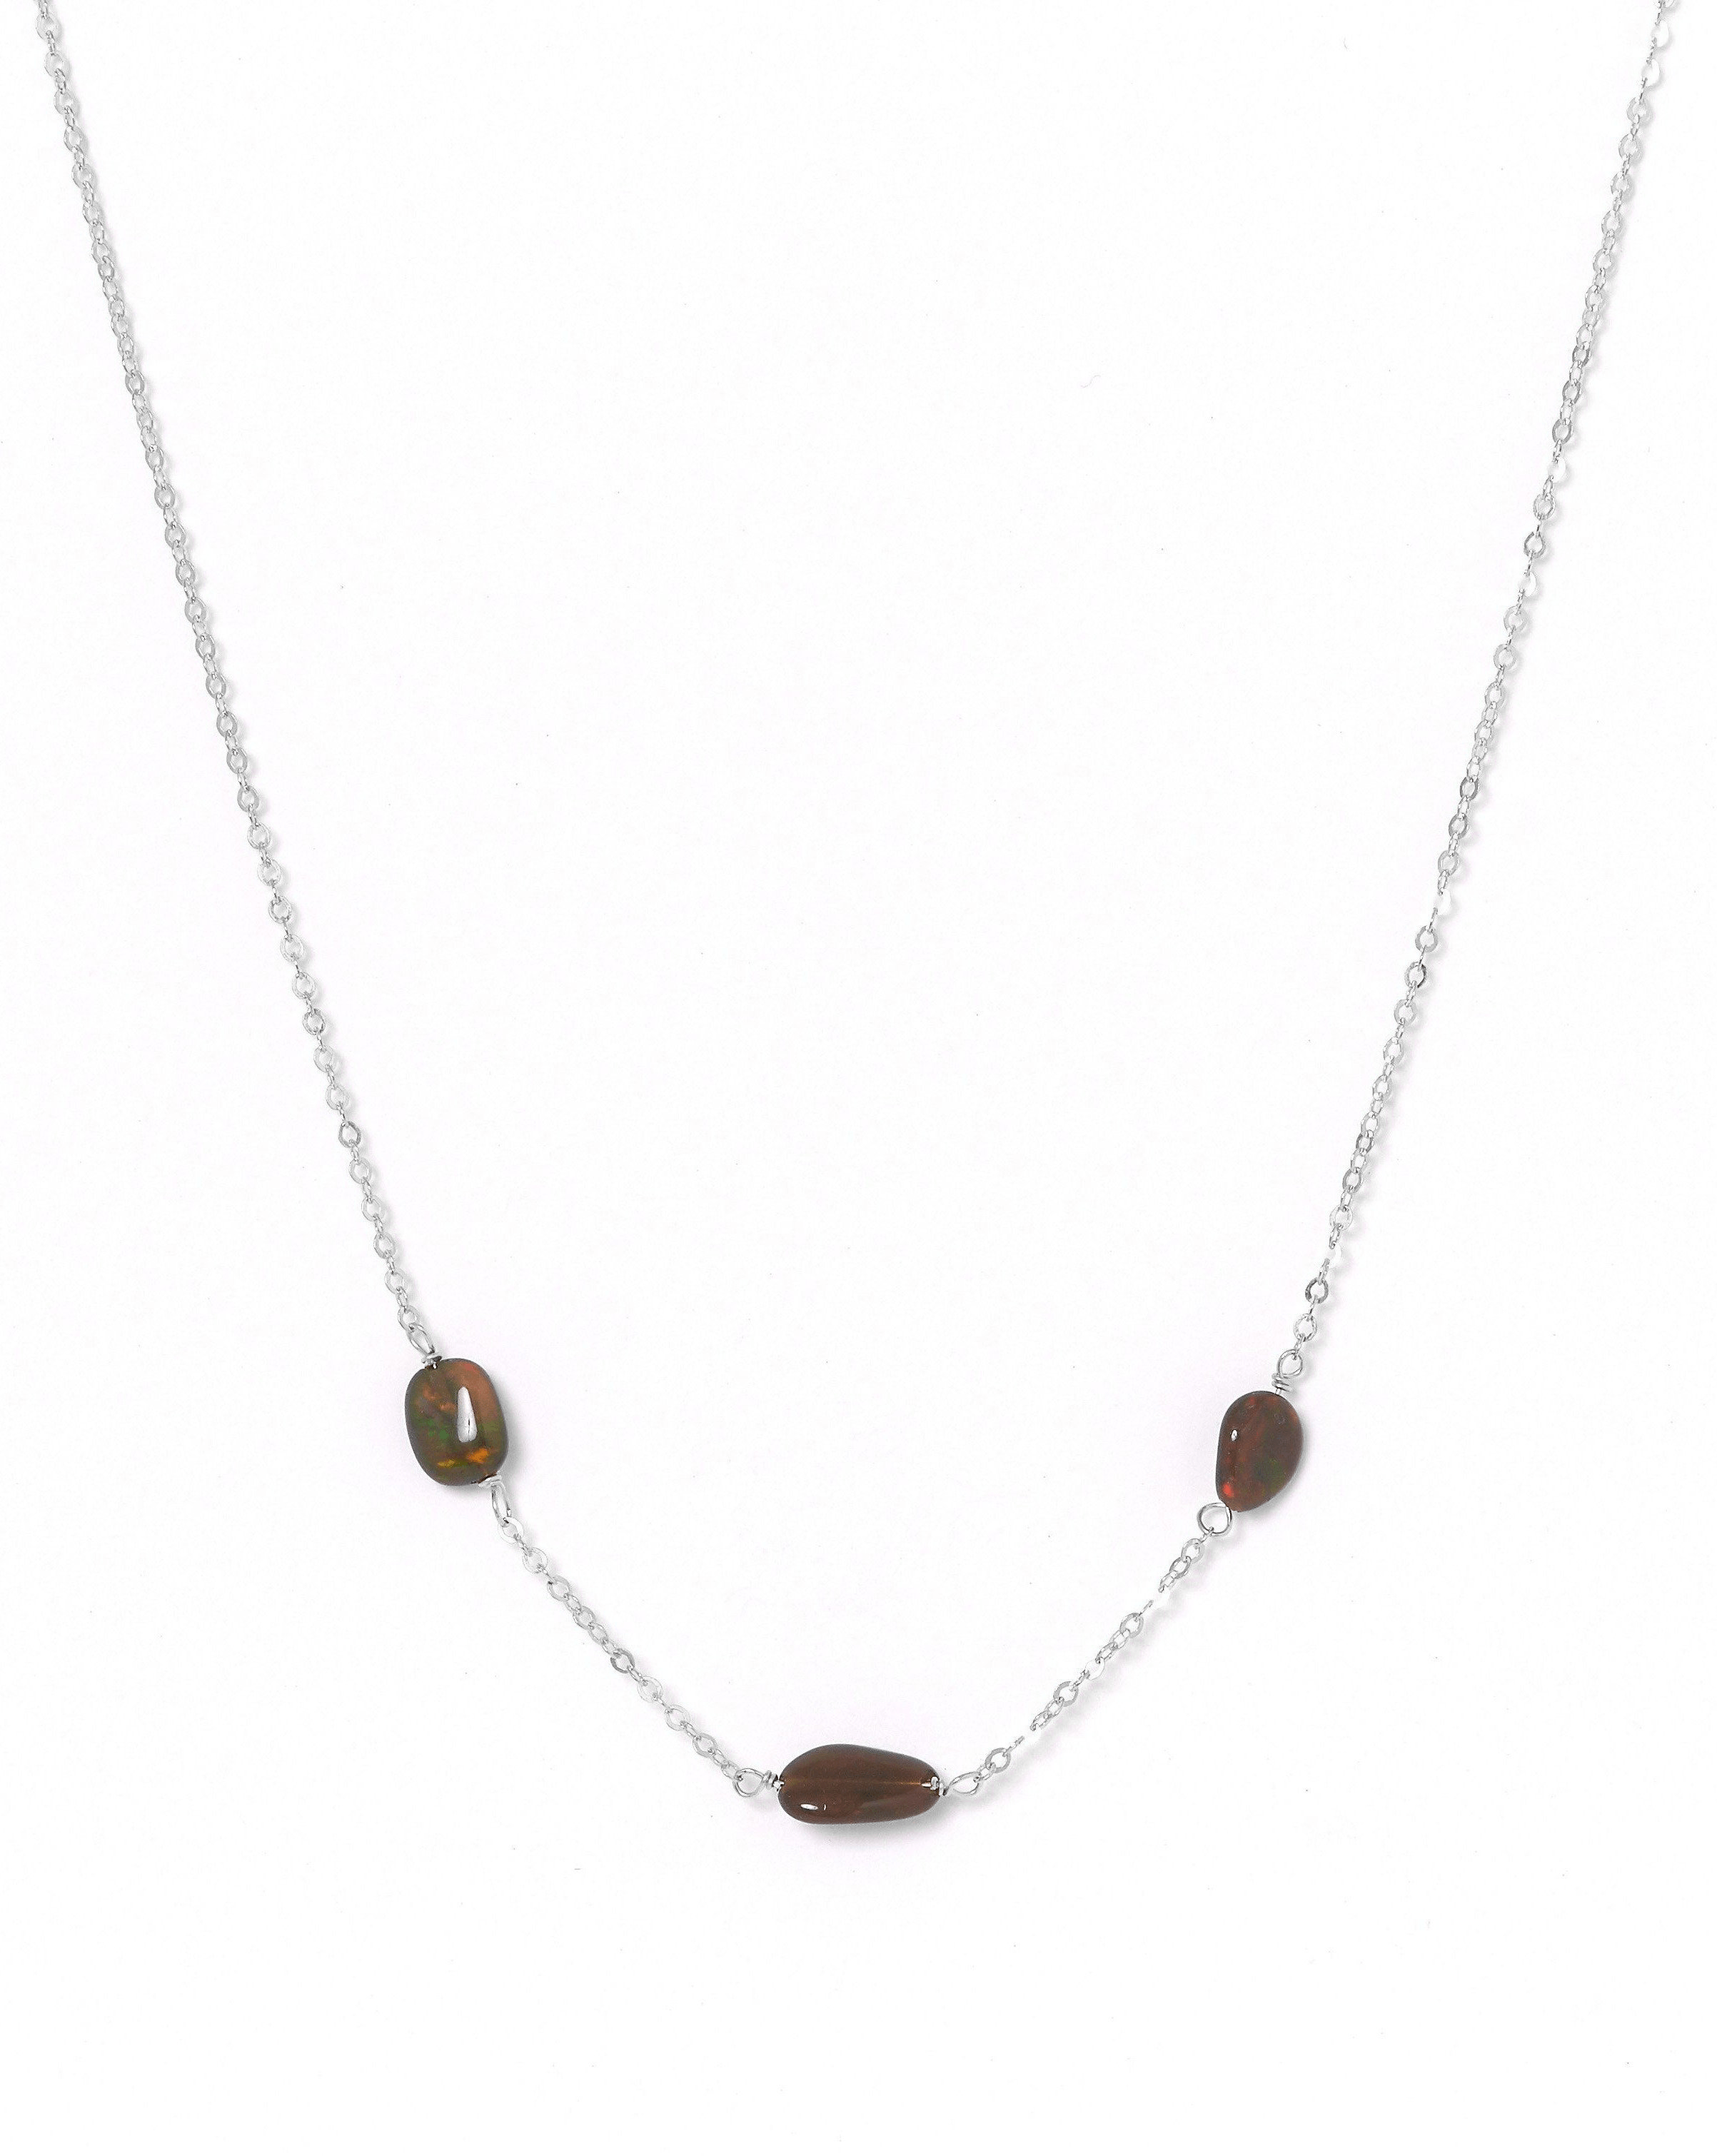 Erin Fire Necklace by KOZAKH. A 16 to 18 inch adjustable length necklace in Sterling Silver, featuring 4mm to 5mm smooth Black Opal gems.